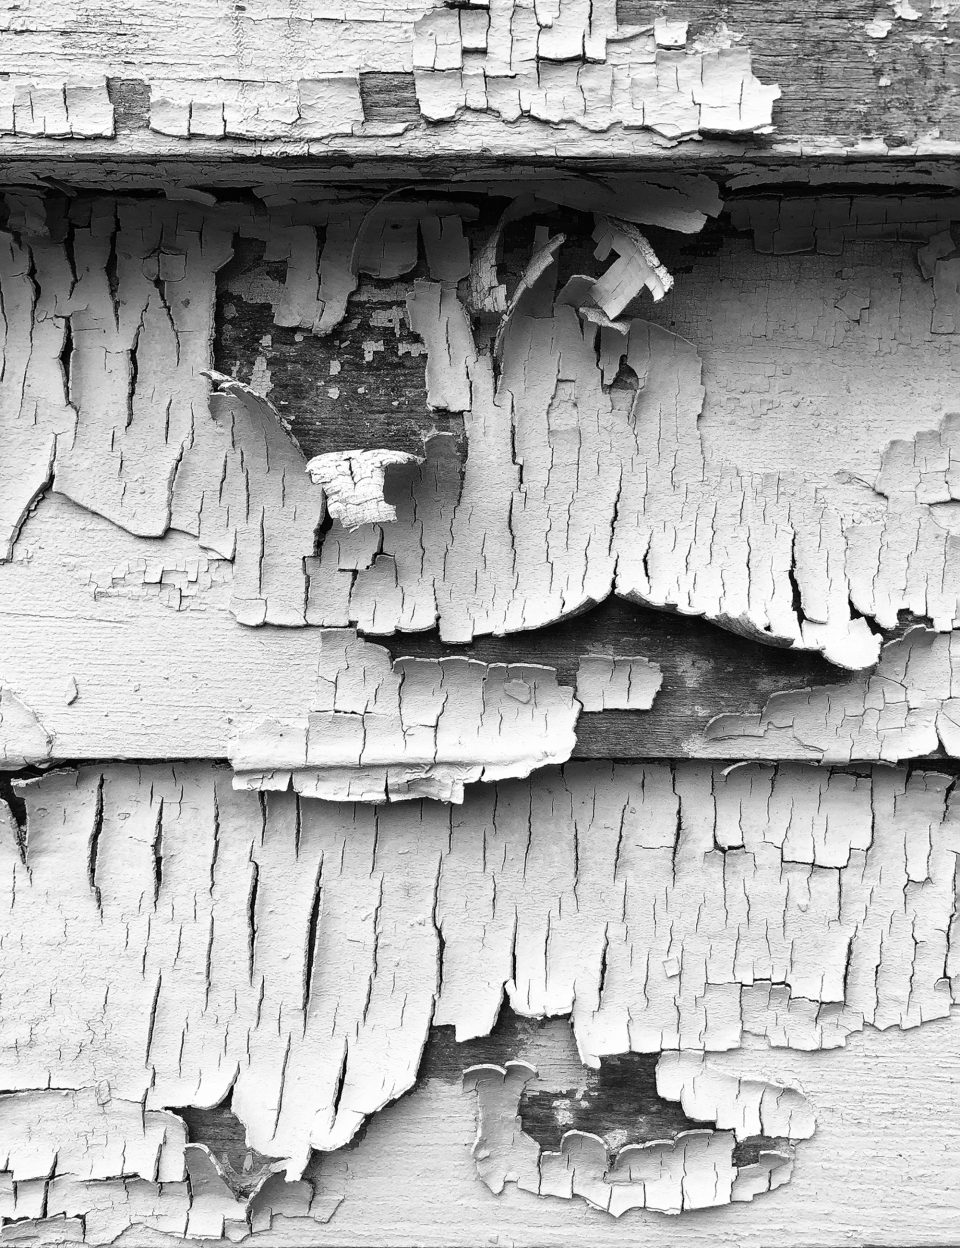 Peeling Paint on an Old White House - Black and White Photograph by Keith Dotson. Buy a fine art print.